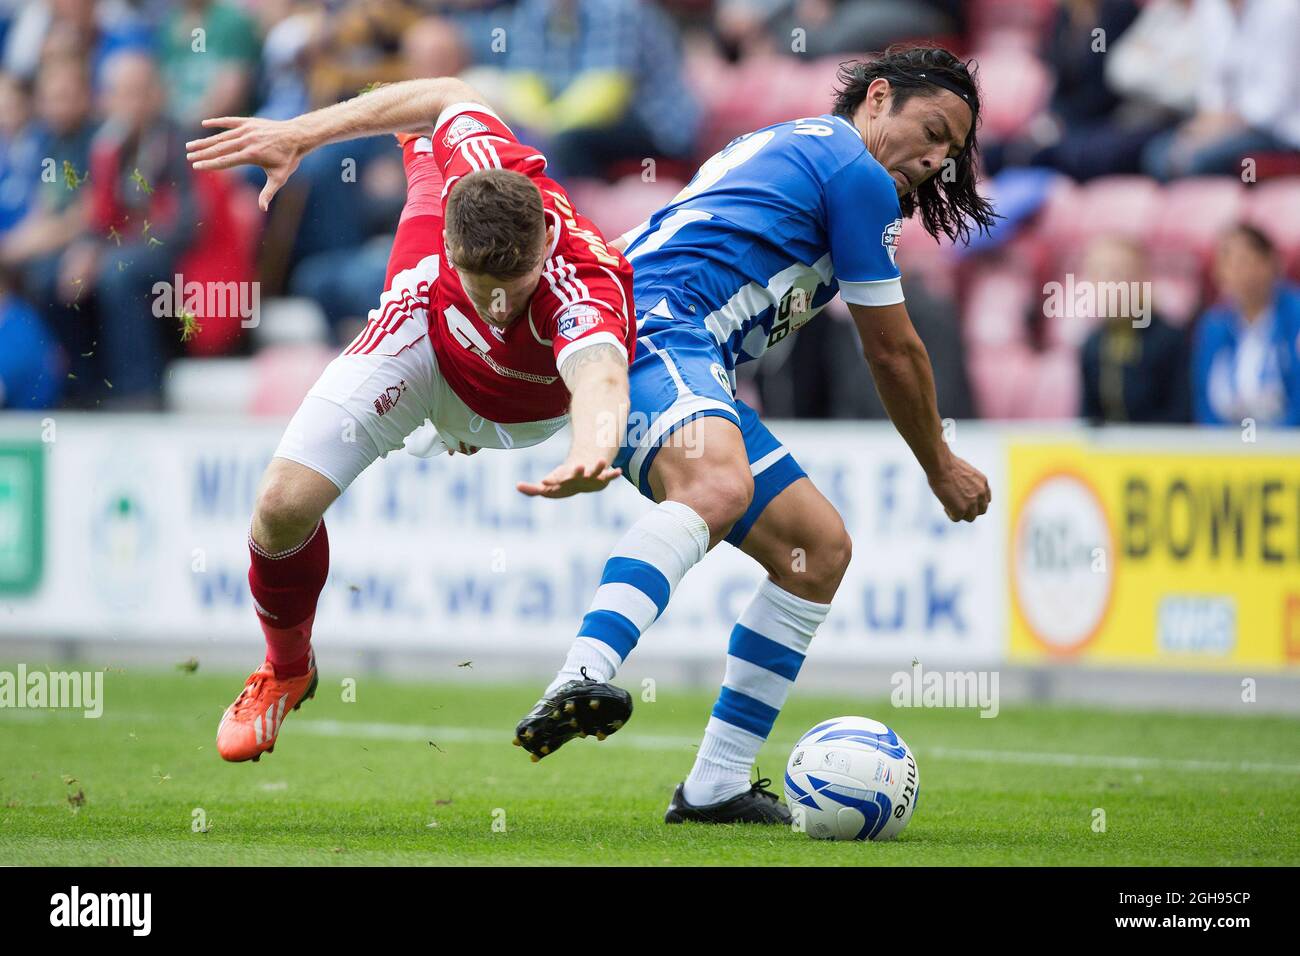 Forest's Jamie Mackie and Wigan's Roger Espinoza in action during the Sky Bet Football League Championship match between Wigan Athletic and Nottingham Forest at the DW Stadium, Wigan on August 31, 2013. Stock Photo